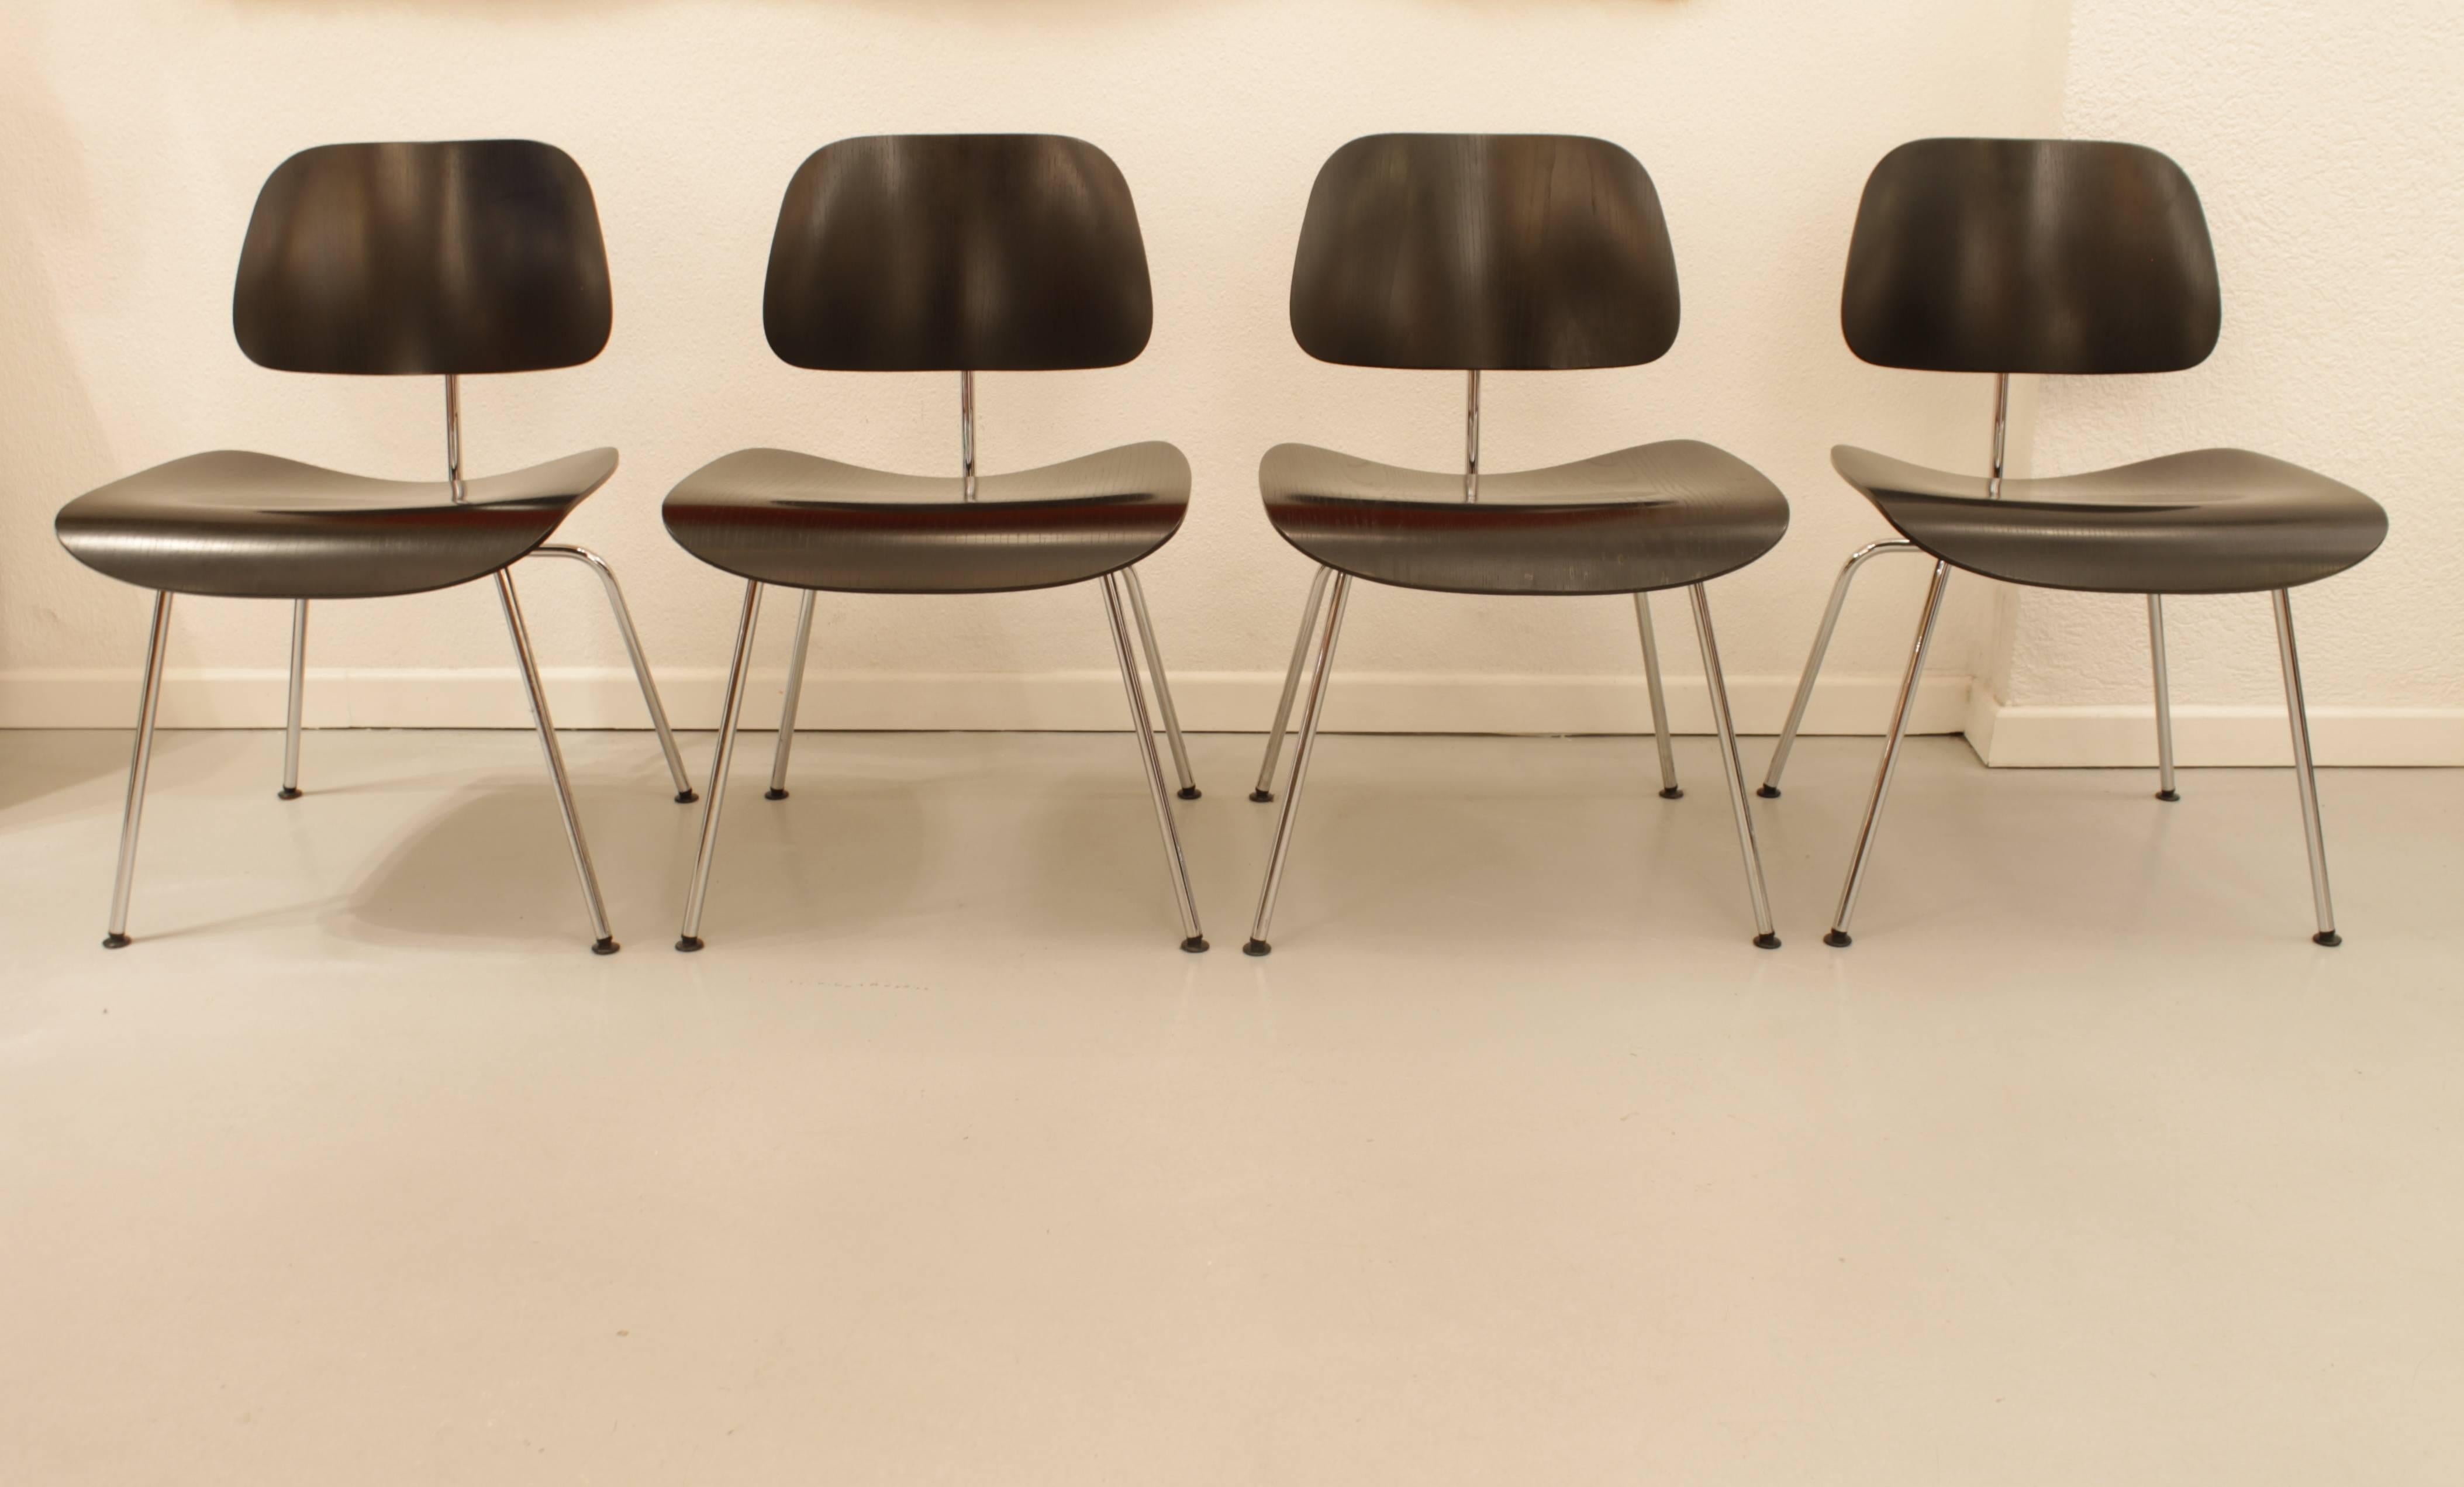 Set of four DCM dining chairs by Charles & Ray Eames
Vitra productions. Perfect condition.